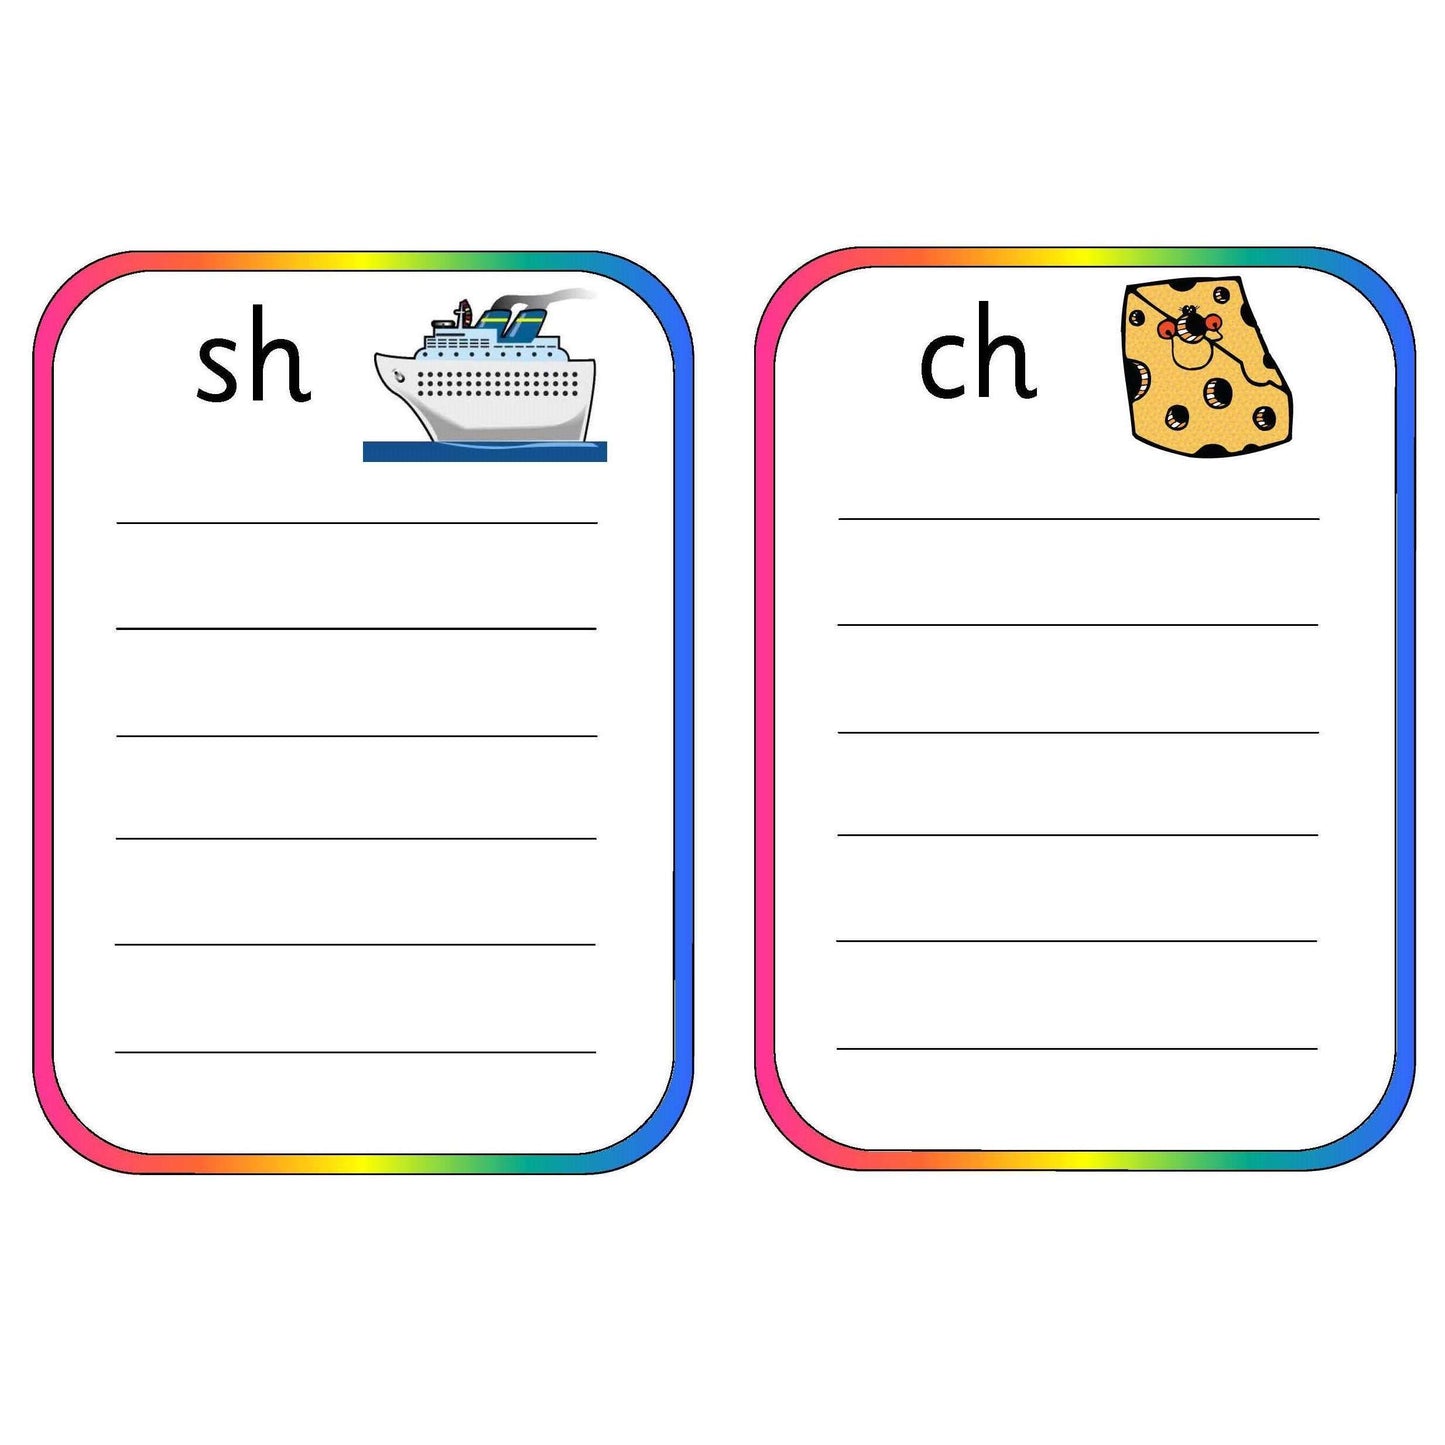 Spelling Pocket Lists Consonant Digraphs:Primary Classroom Resources